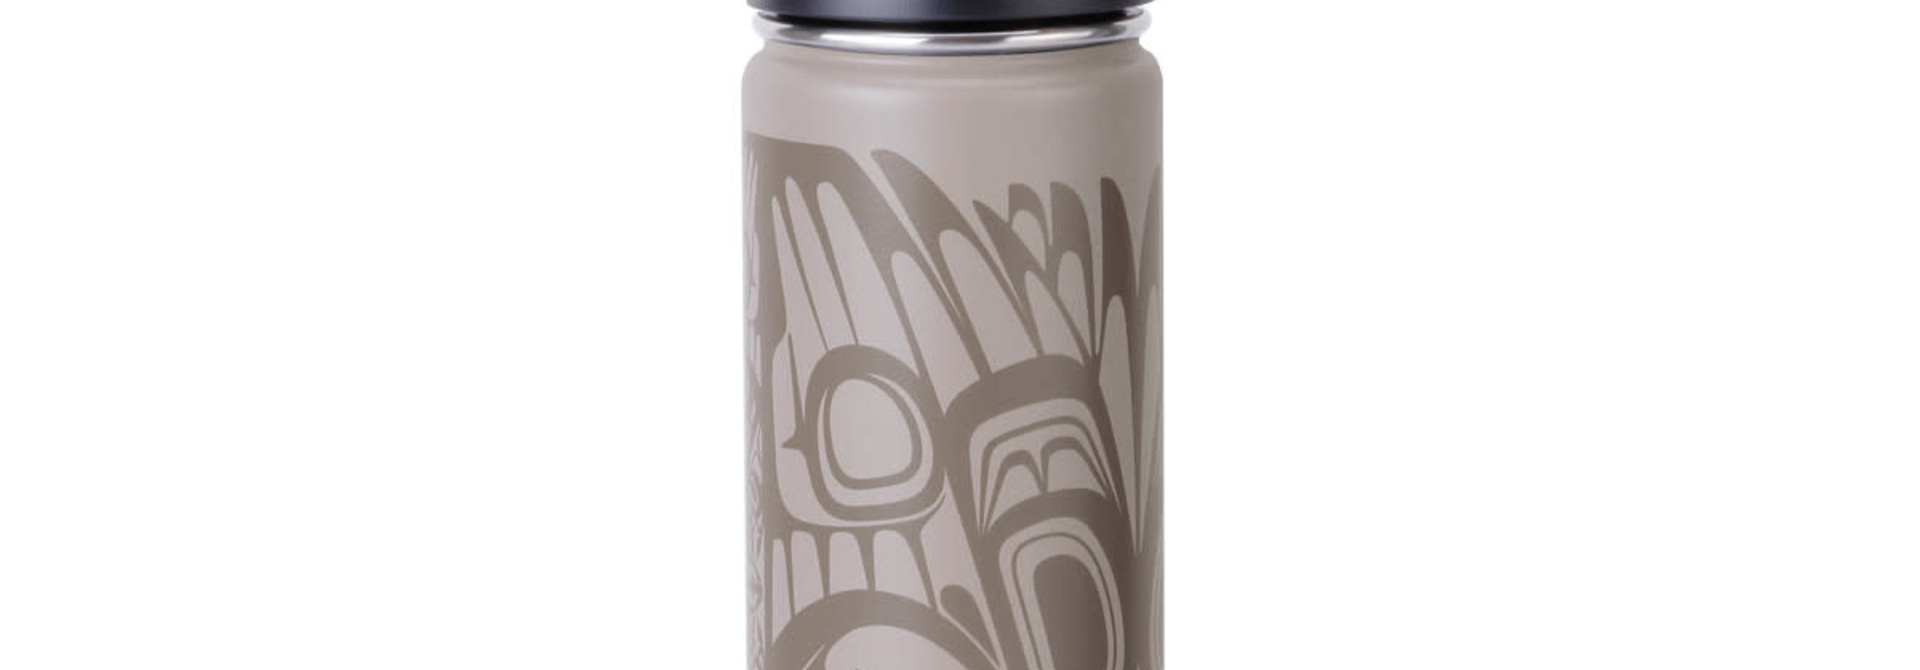 21 oz Wide Mouth Insulated Bottles - Eagle Flight by Paul Windsor,